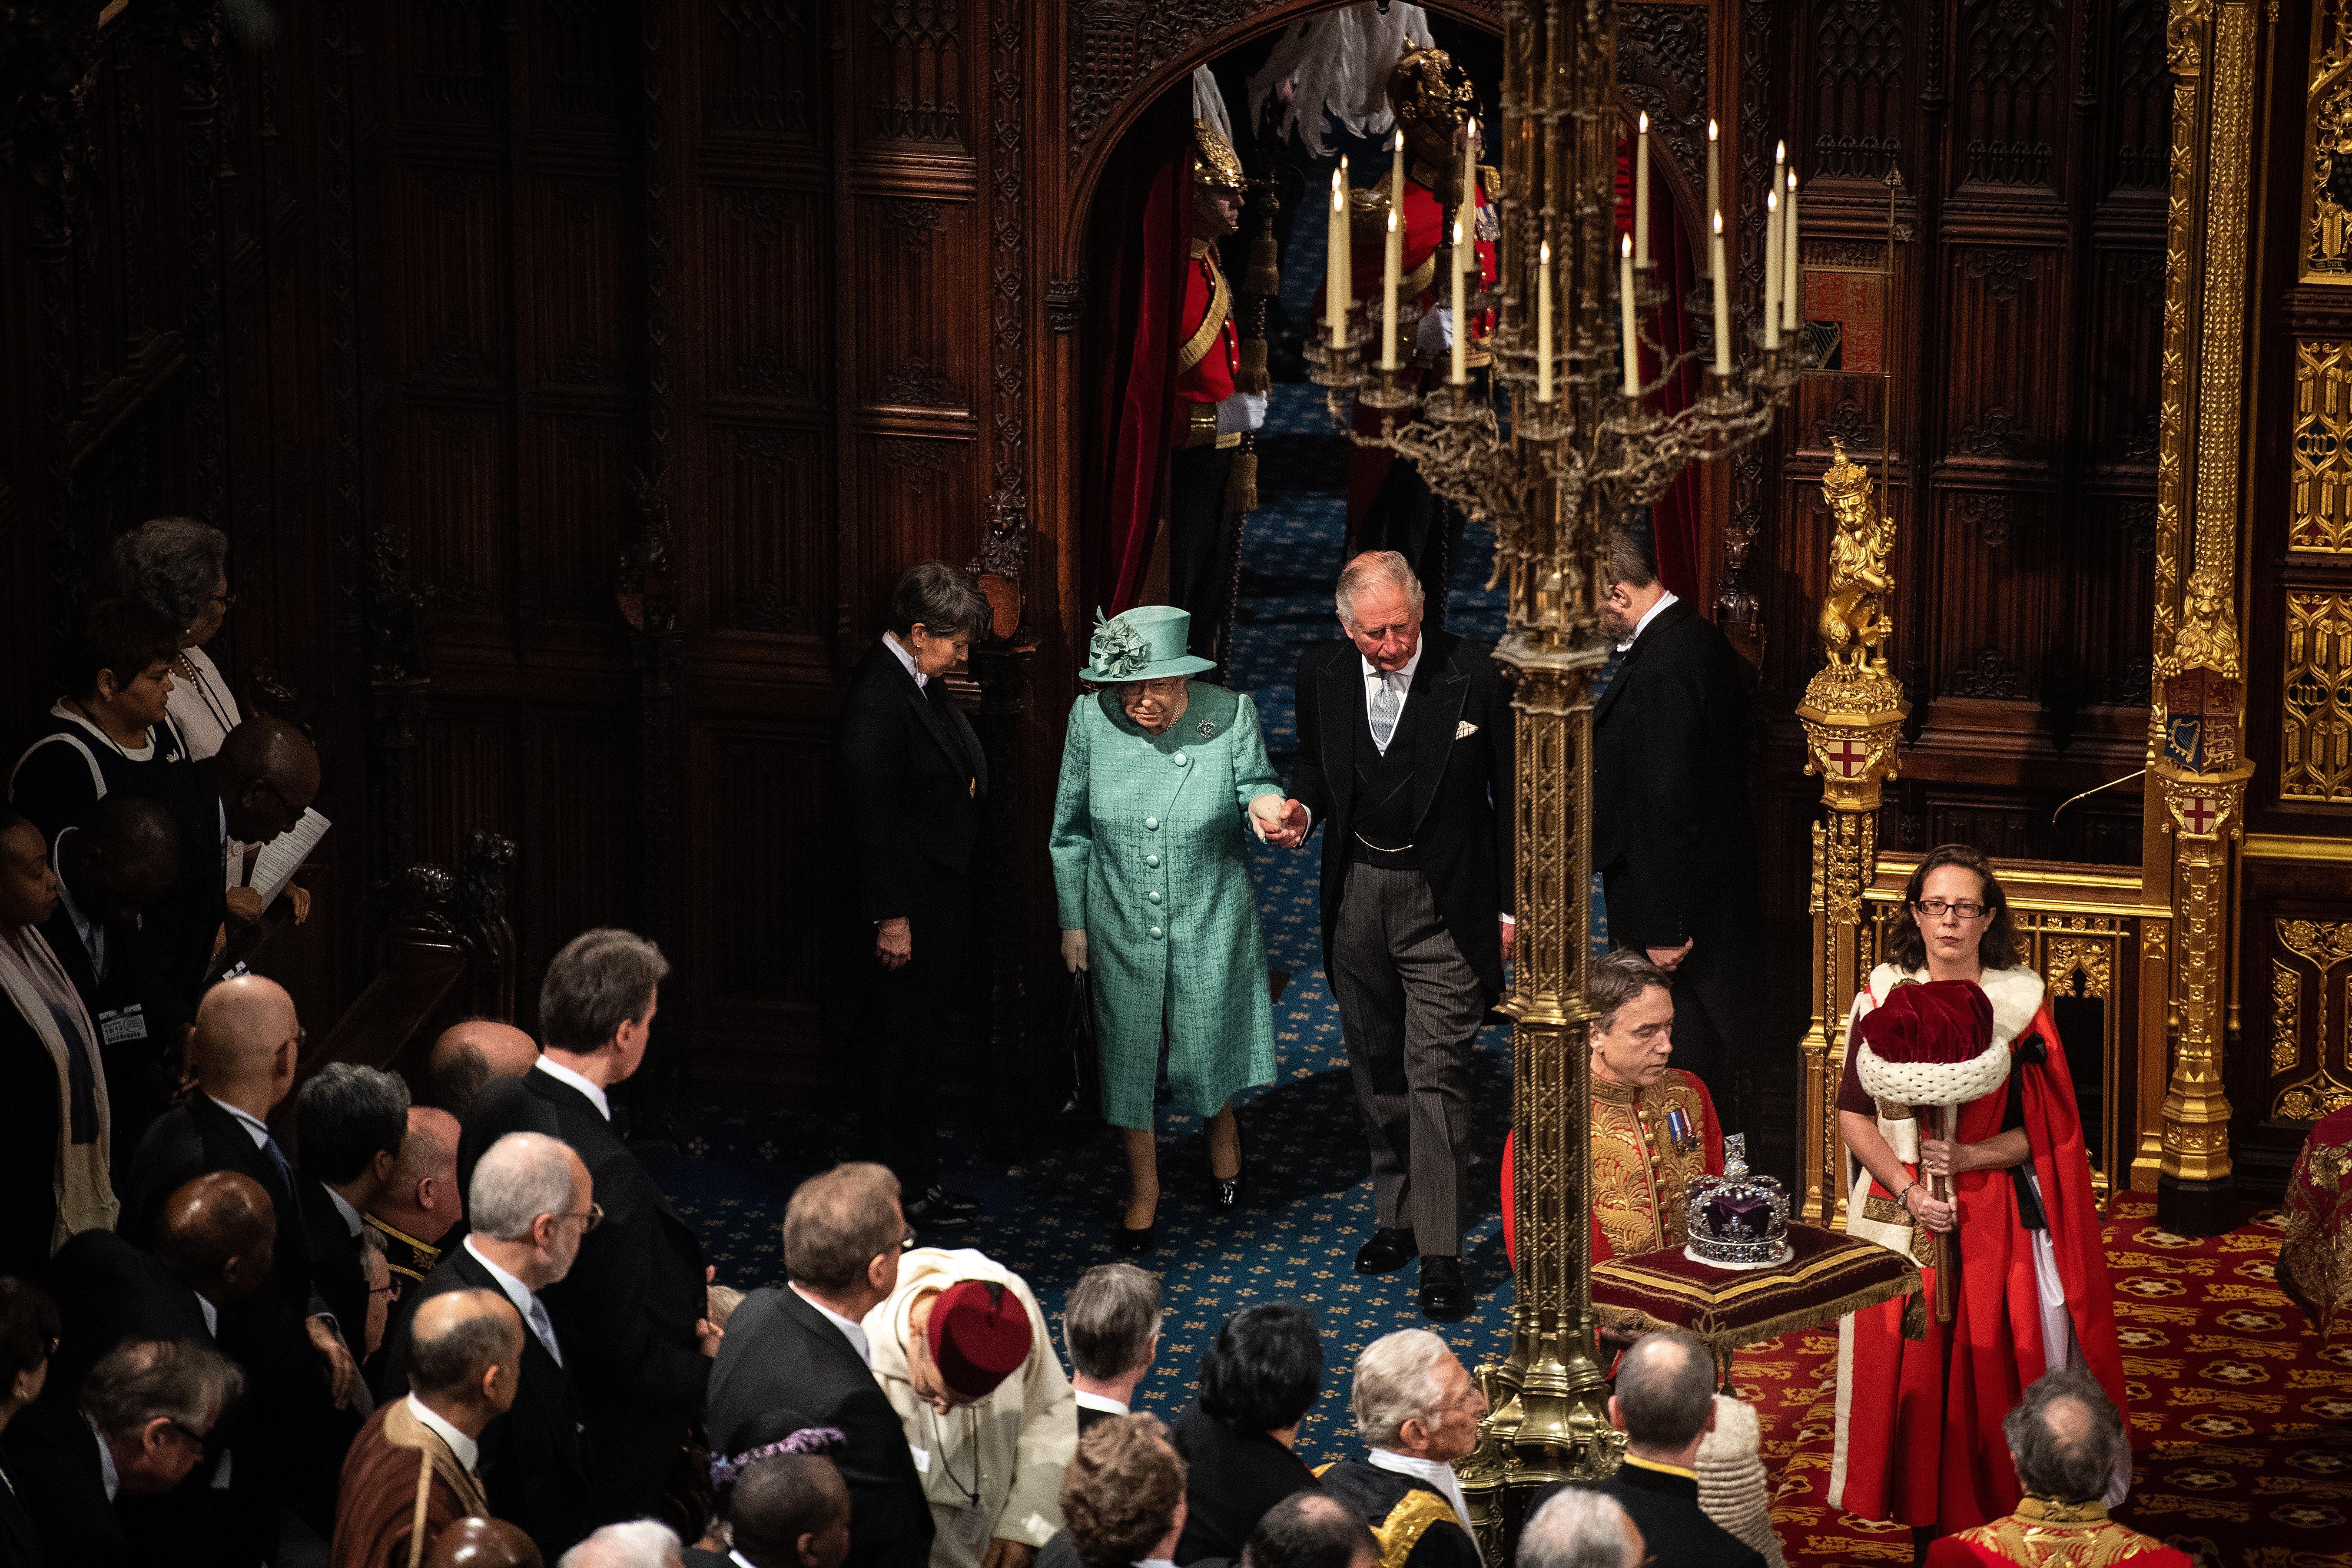 Queen Elizabeth II accompanied by Prince Charles, Prince of Wales, enters the chamber, during the State Opening of Parliament, in the House of Lords at the Palace of Westminster in London.